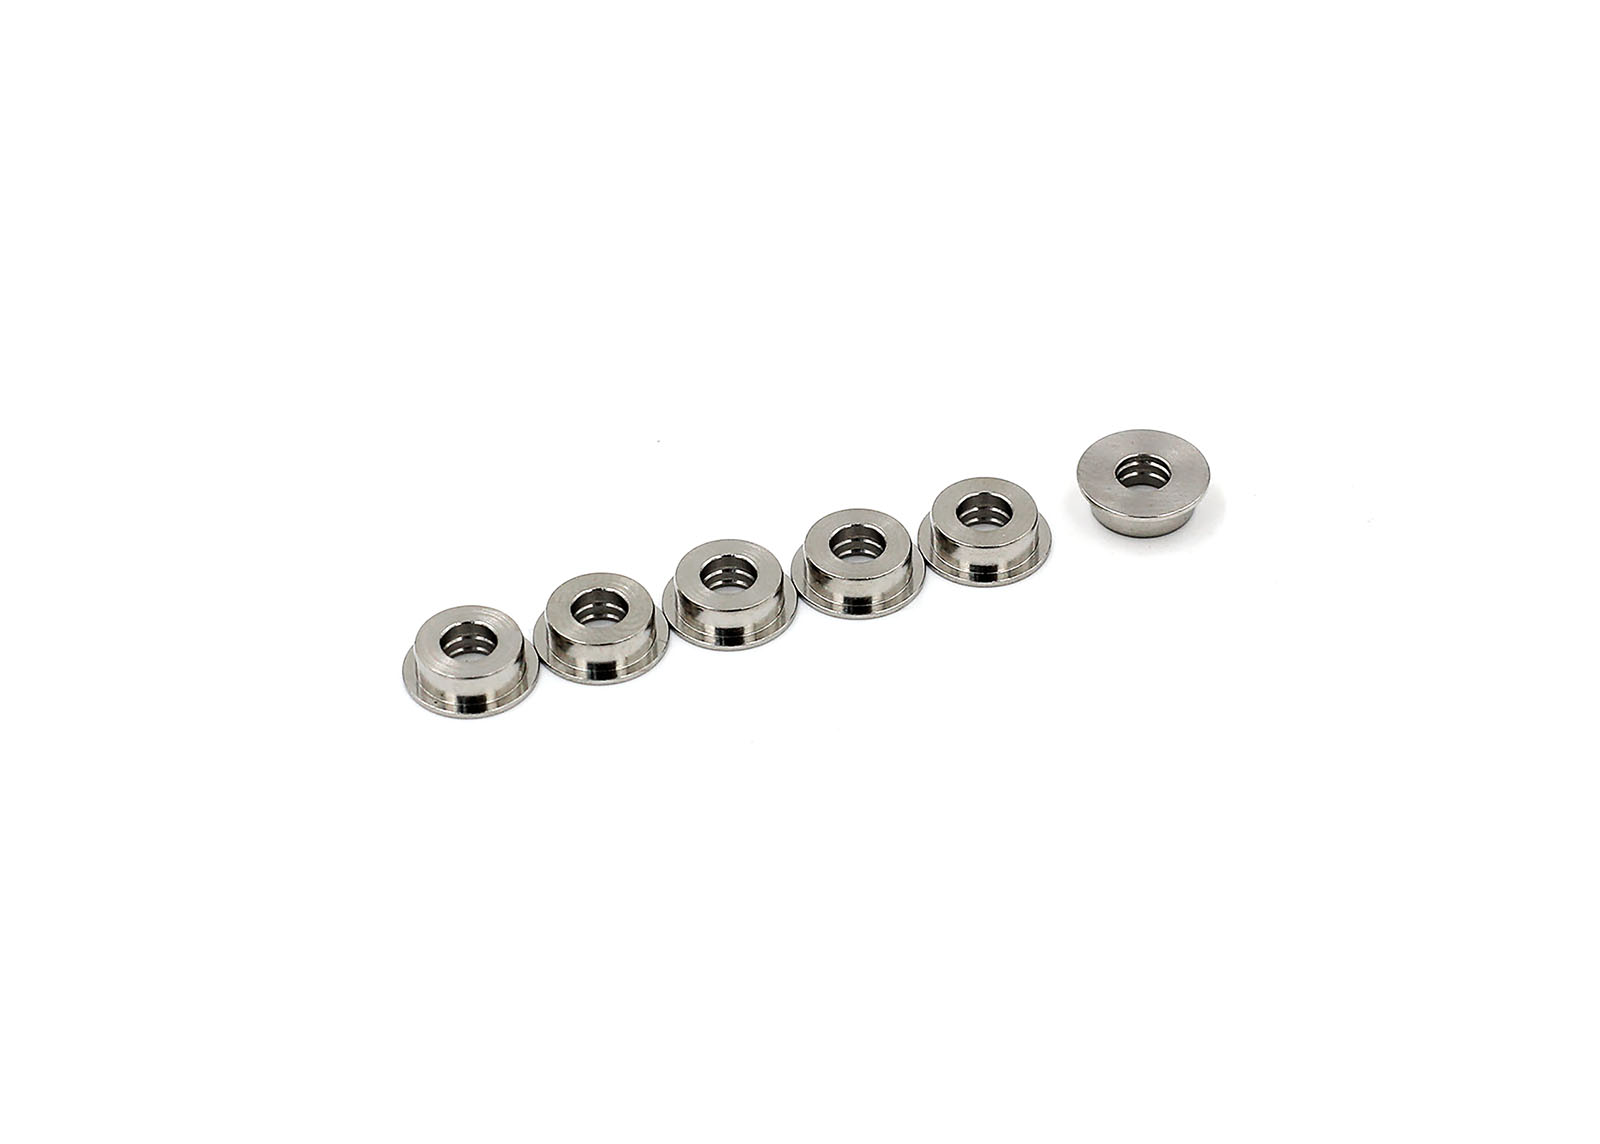 Stainless Bushings for Jing Gong Gearbox 6mm (6pcs) - Modify Airsoft parts